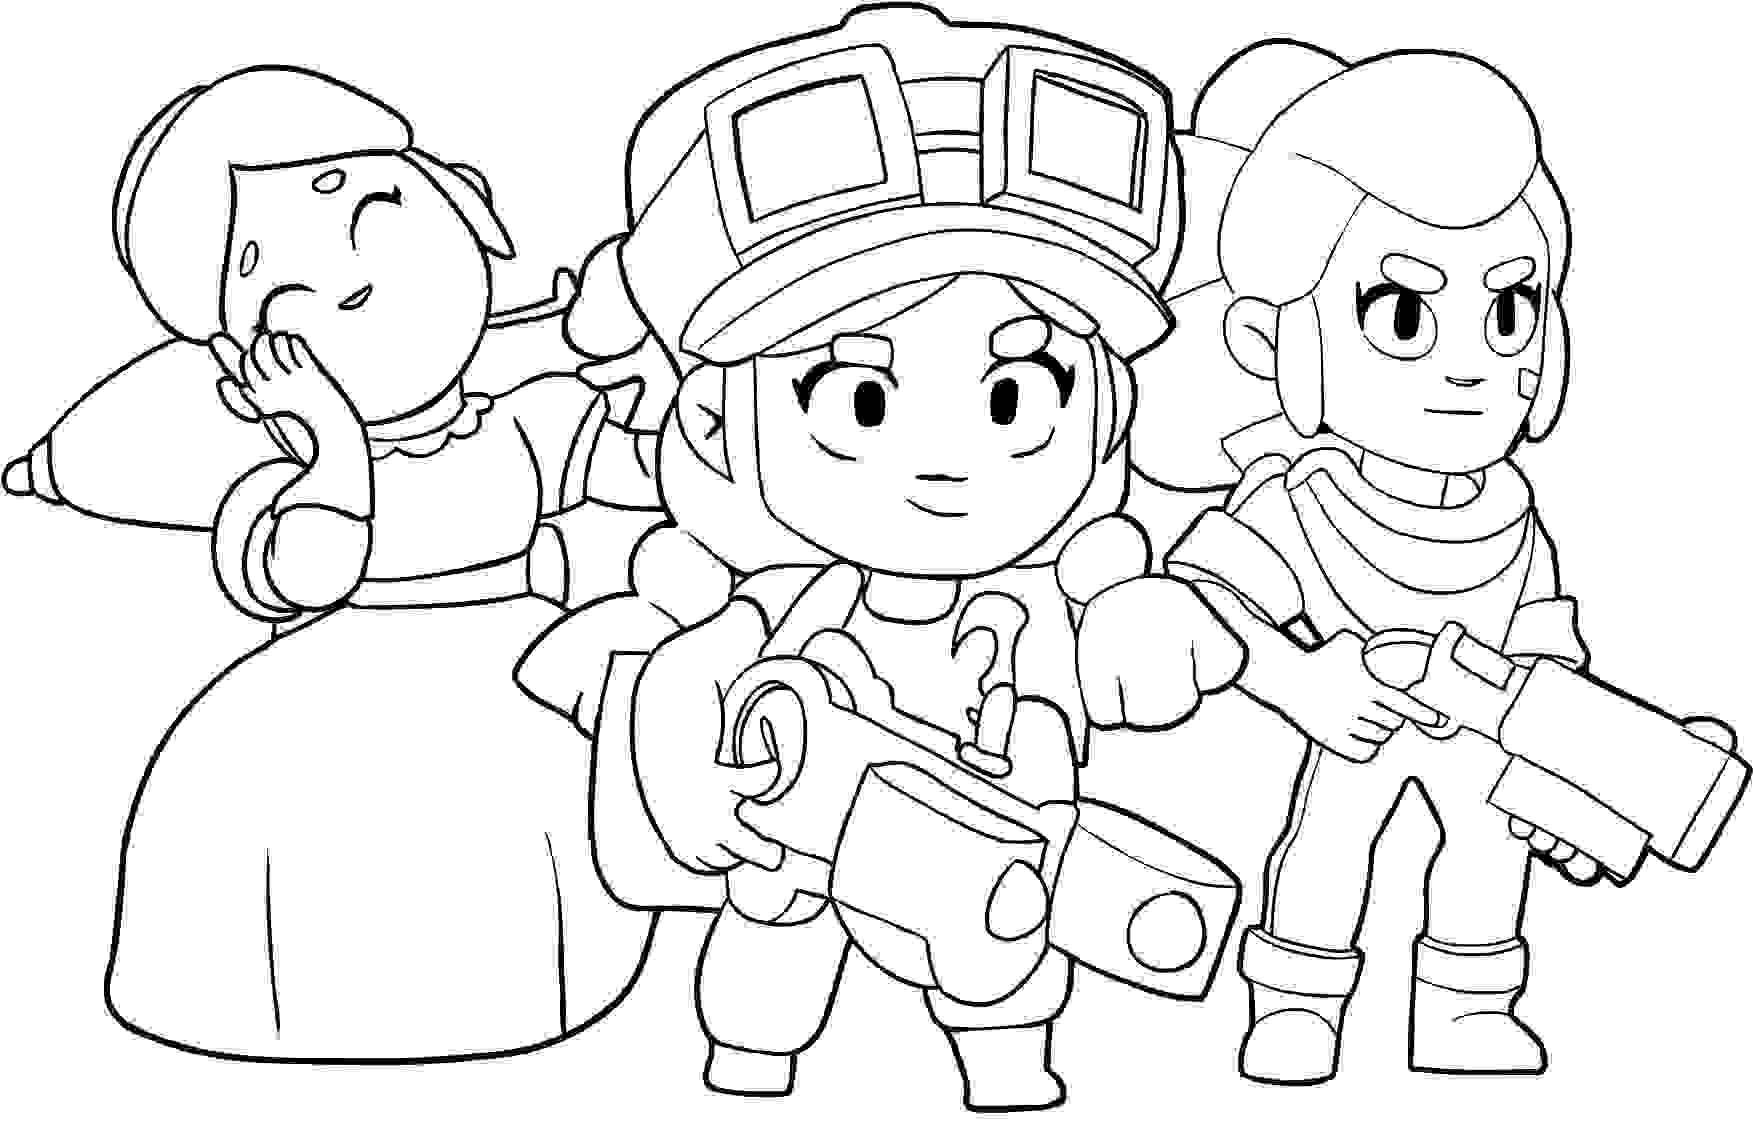 Team Of Jessie, Shelly And Piper From Brawl Stars Coloring Pages